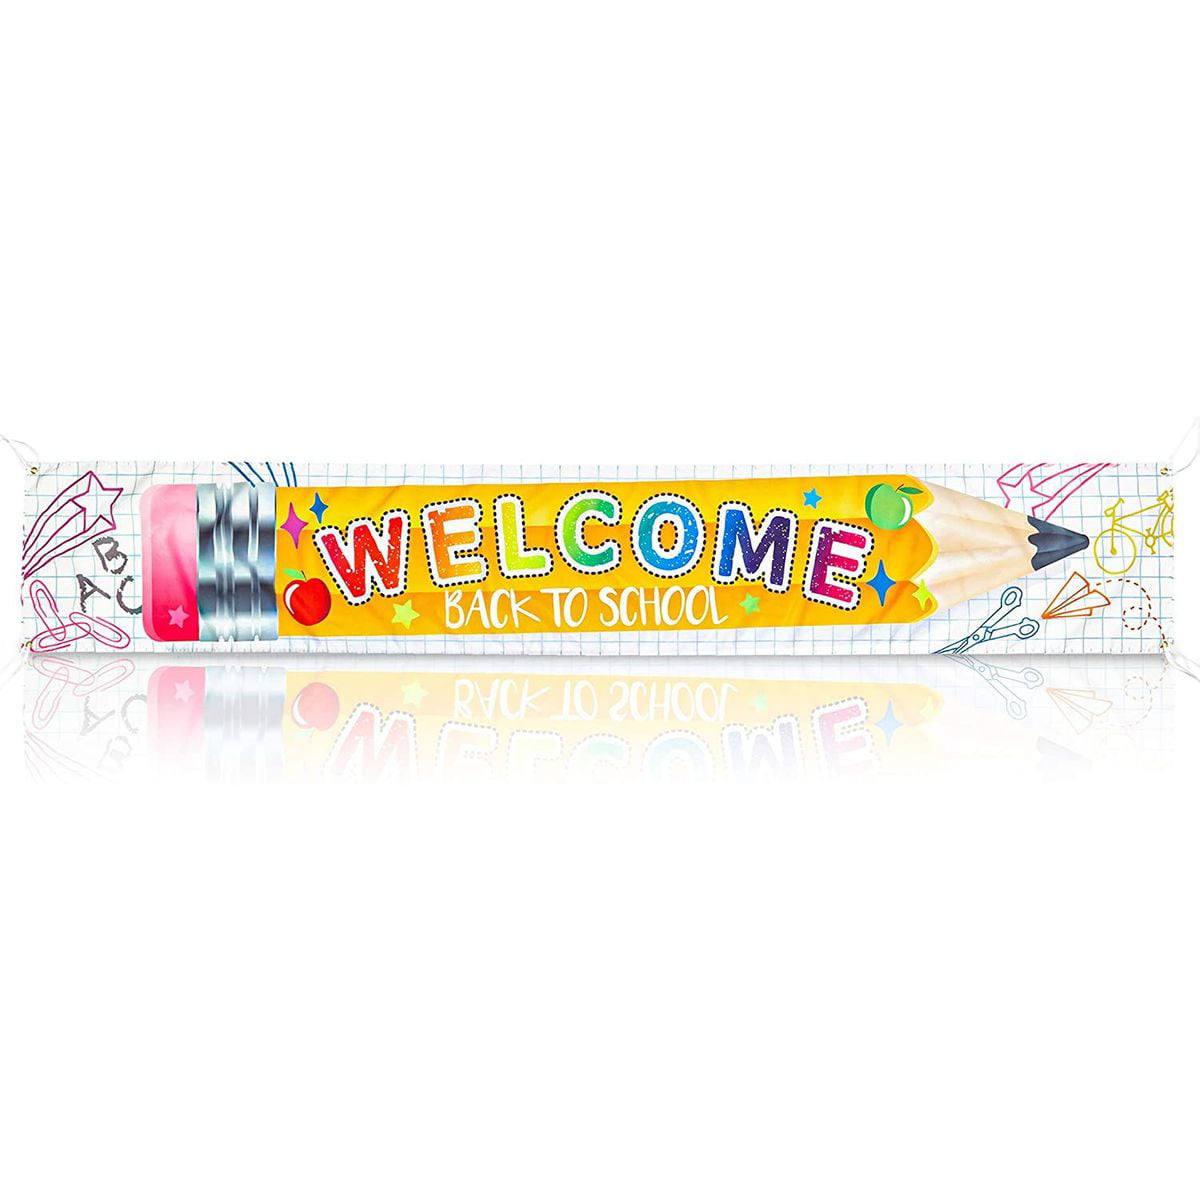 New Welcome/BIENVENIDOS Extra Large 13 oz Heavy Duty Vinyl Banner Sign with Metal Grommets Many Sizes Available Flag, Store Advertising 